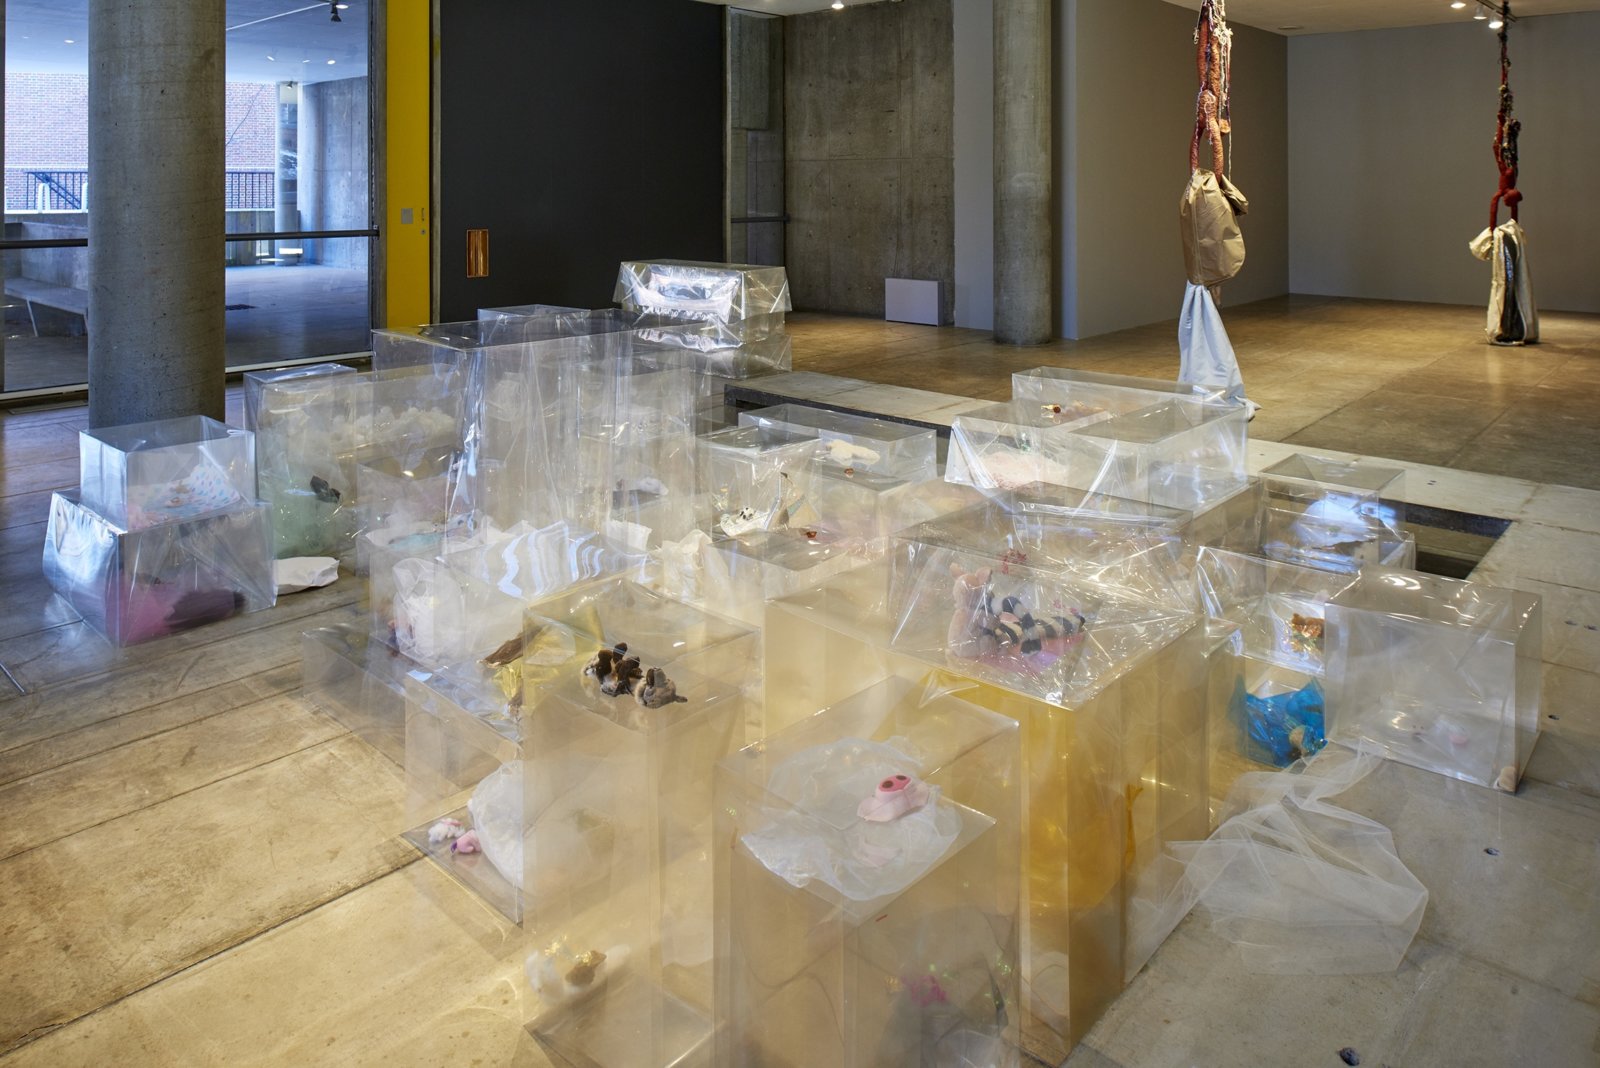 Liz Magor, Pet Co., 2018, polyester film, textiles, paper, stuffed toys, rat skins, mixed media, 44 x 204 x 156 in. (112 x 518 x 396 cm). Installation view, BLOWOUT, Carpenter Center for Visual Arts, Cambridge, USA, 2019